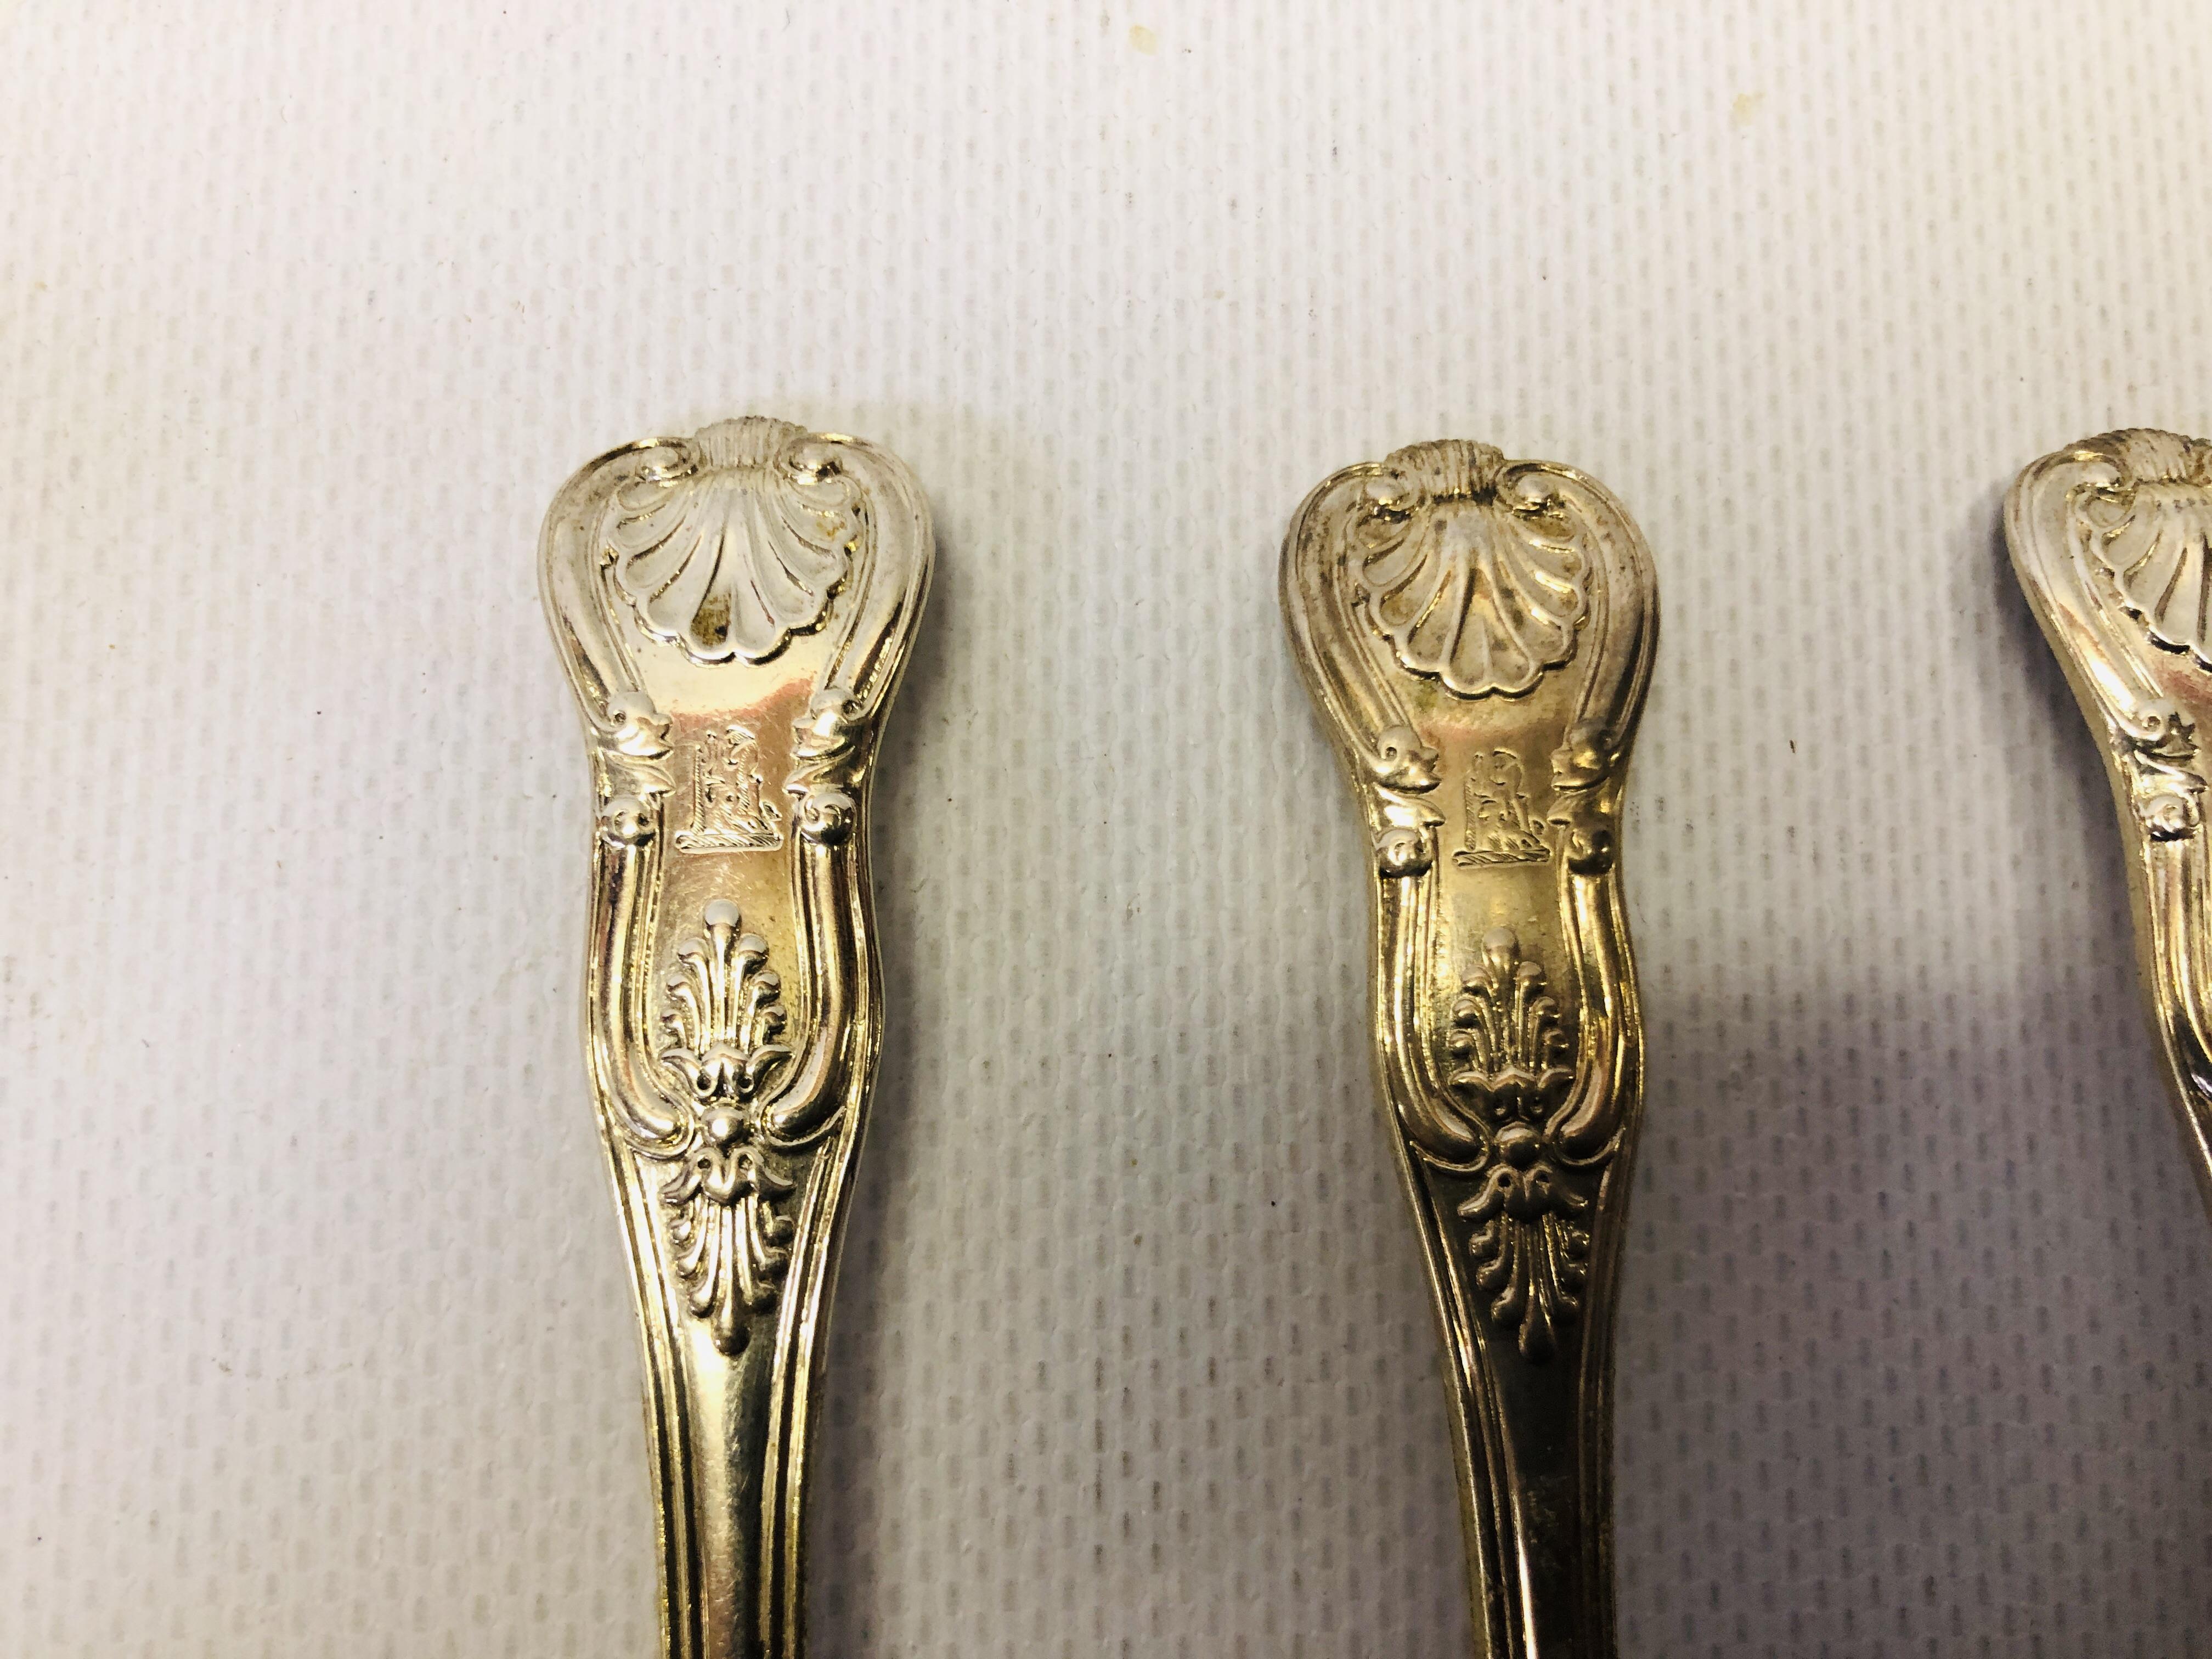 4 WILLIAM IV LARGE KING'S PATTERN SILVER TEASPOONS, W. - Image 5 of 12